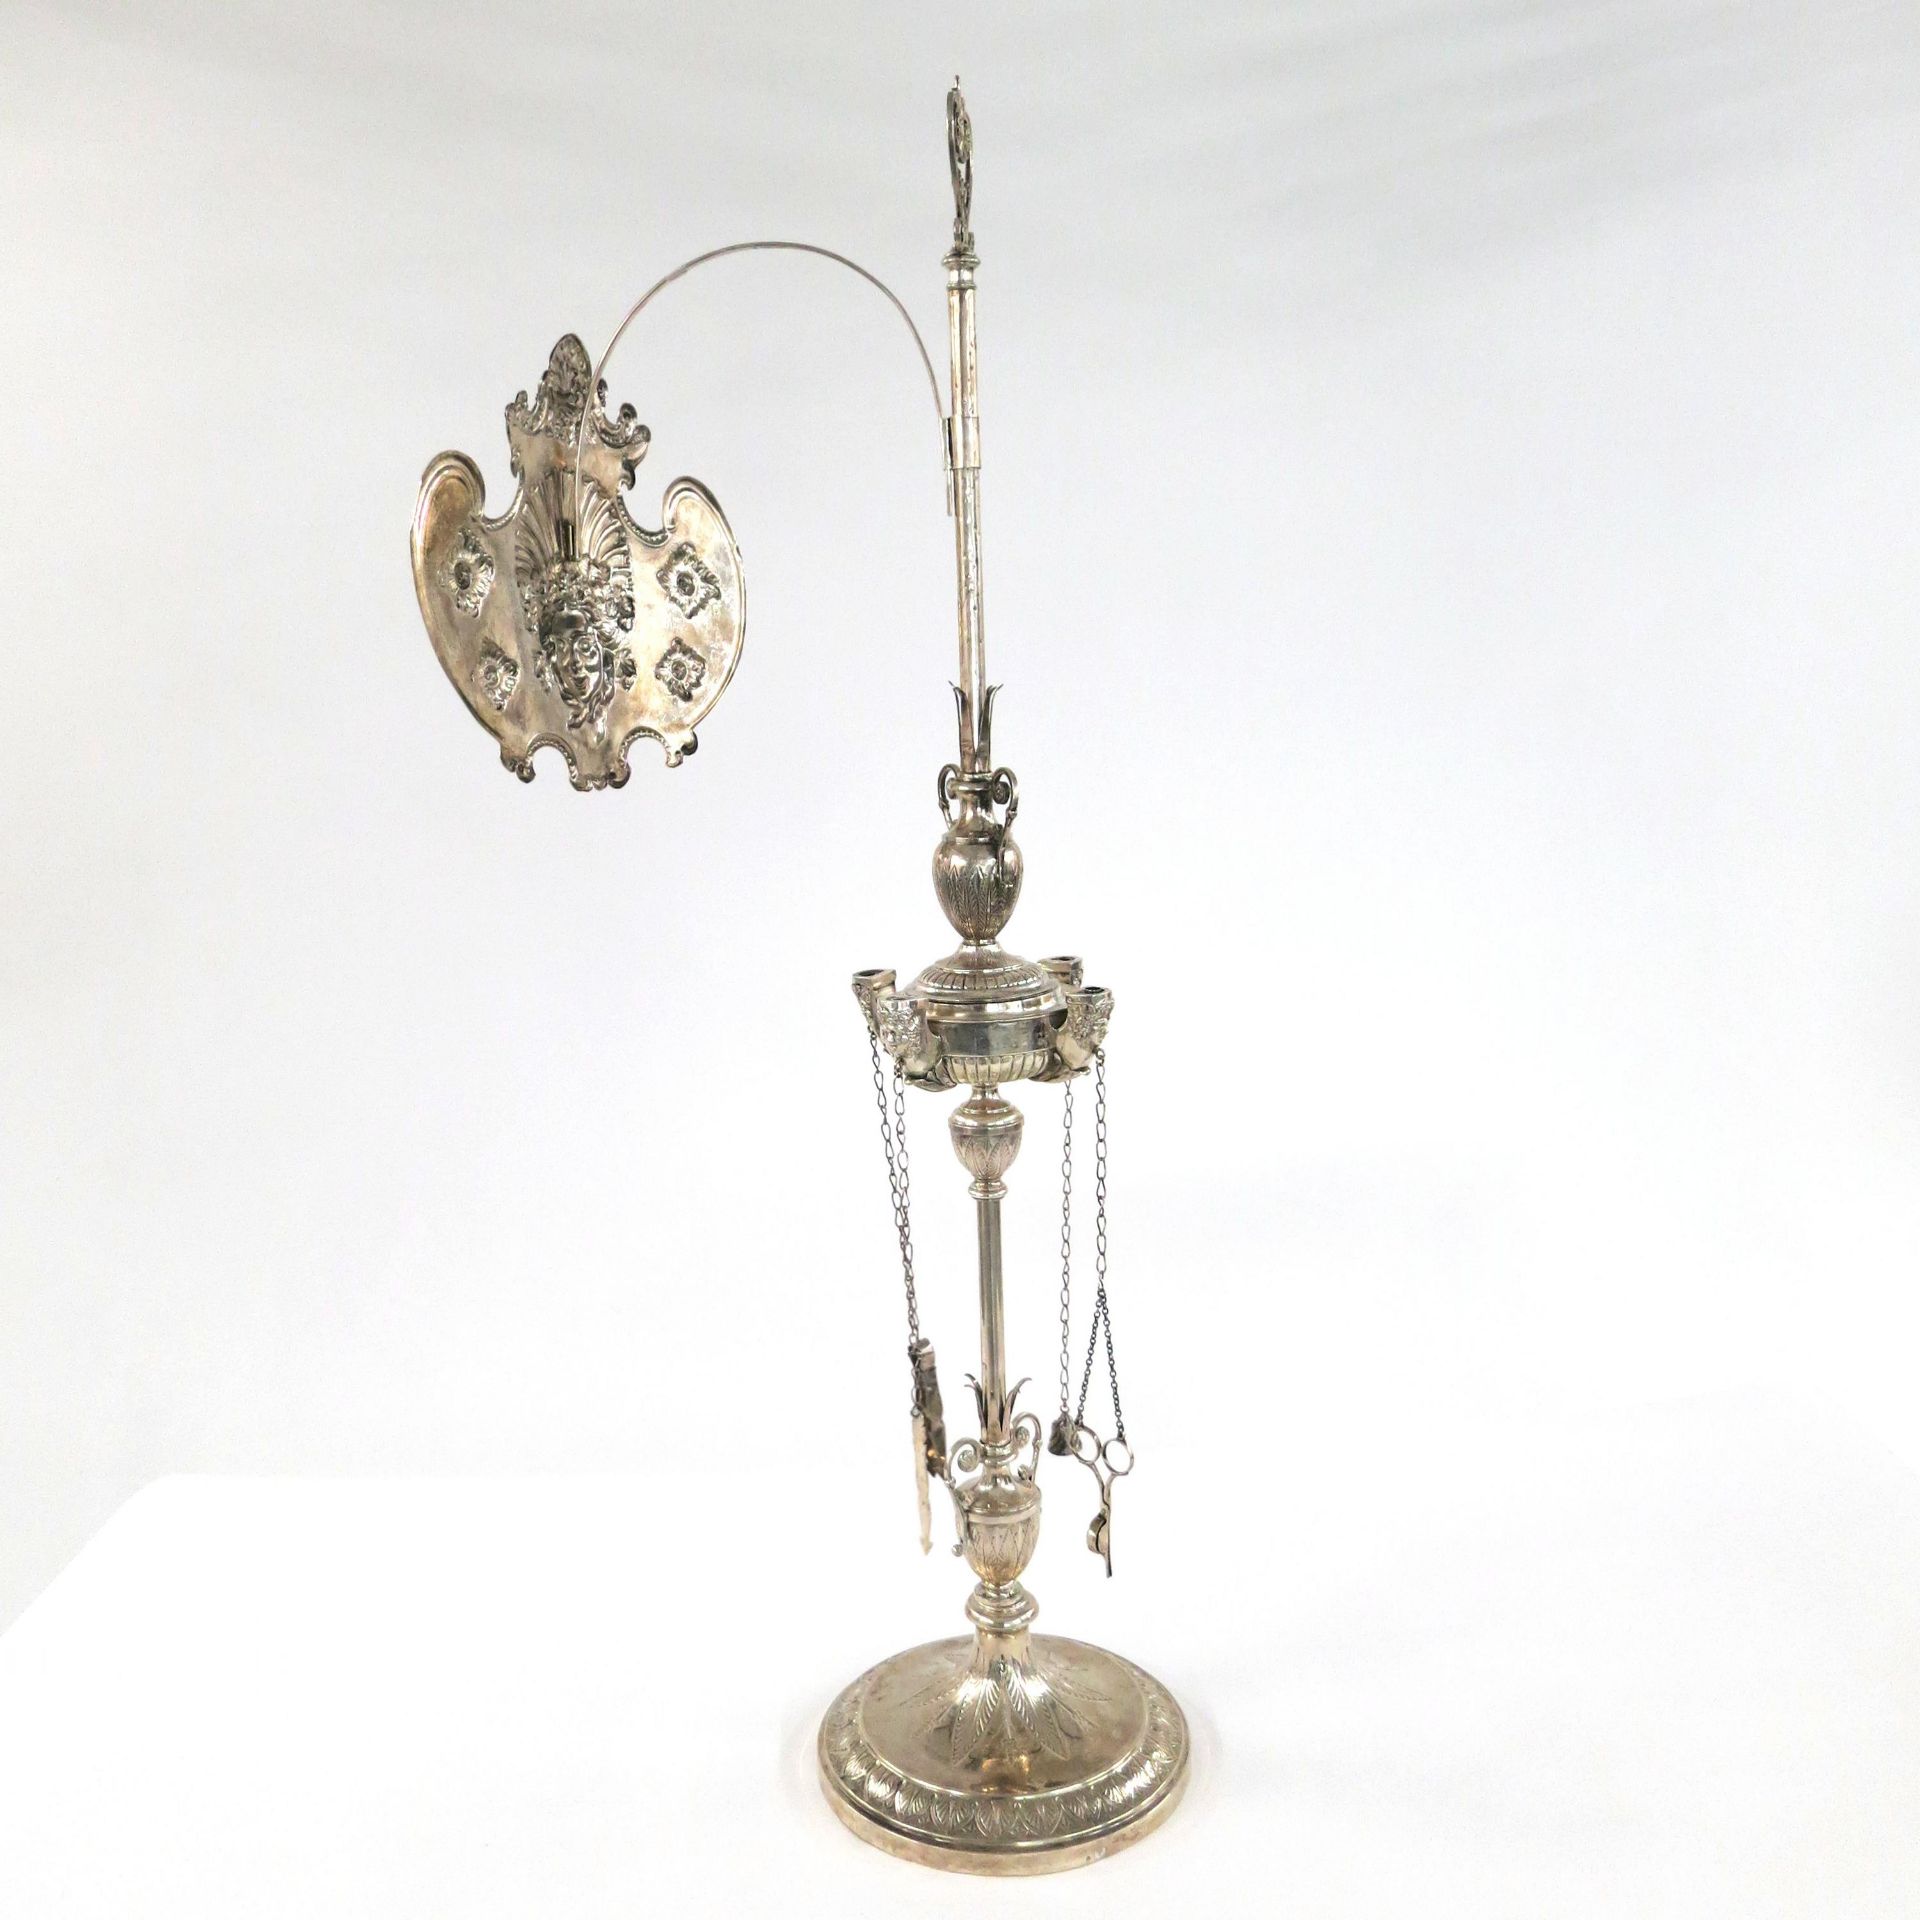 Large oil lamp with light shade - Image 2 of 6